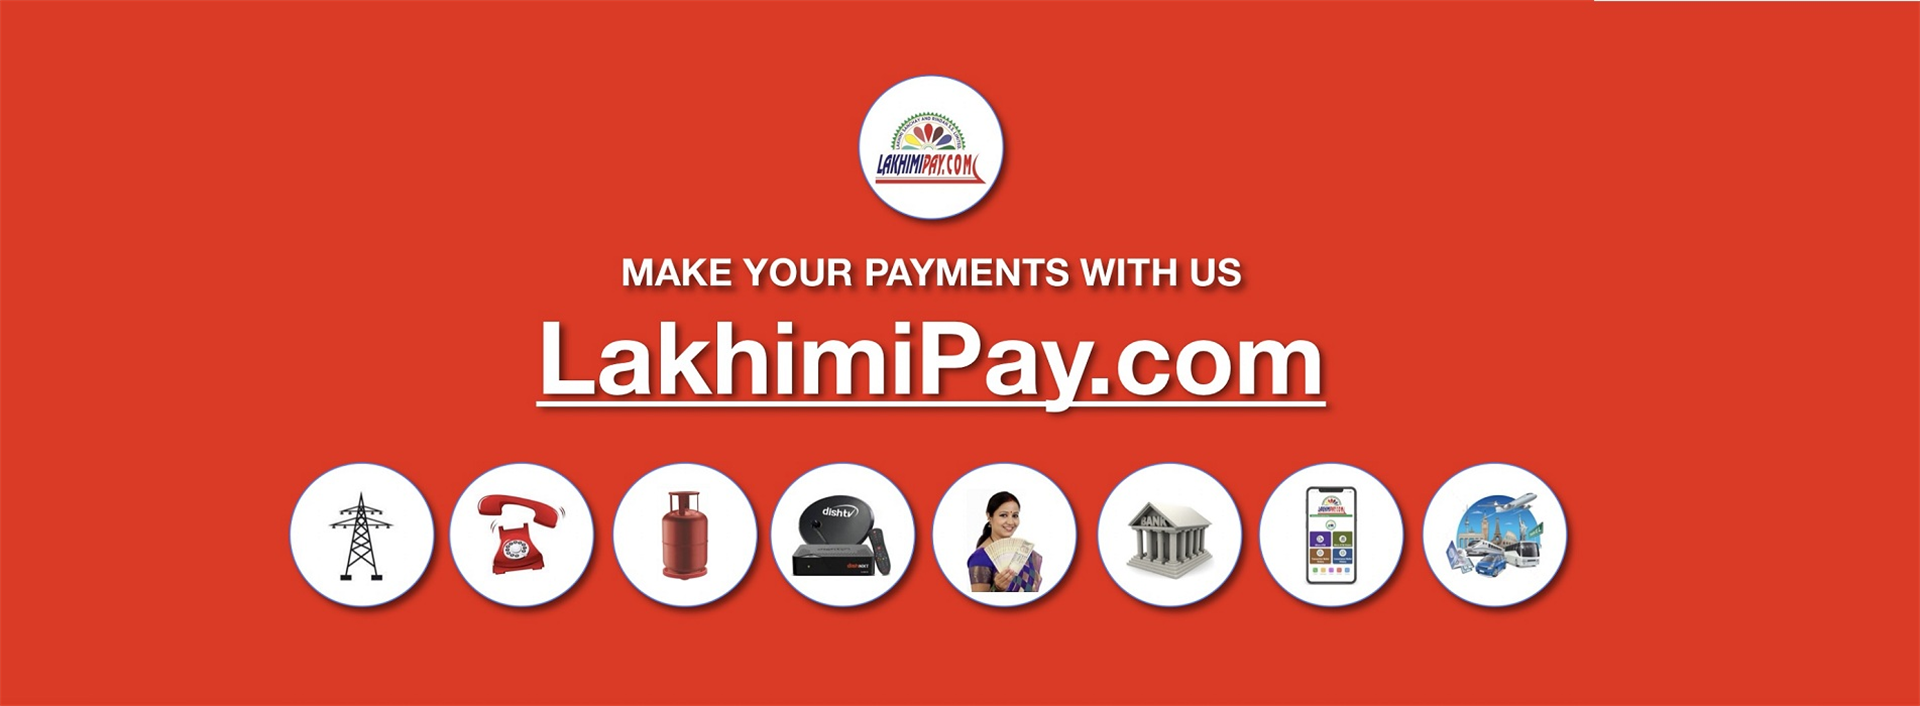 Make_Payment_With_Us